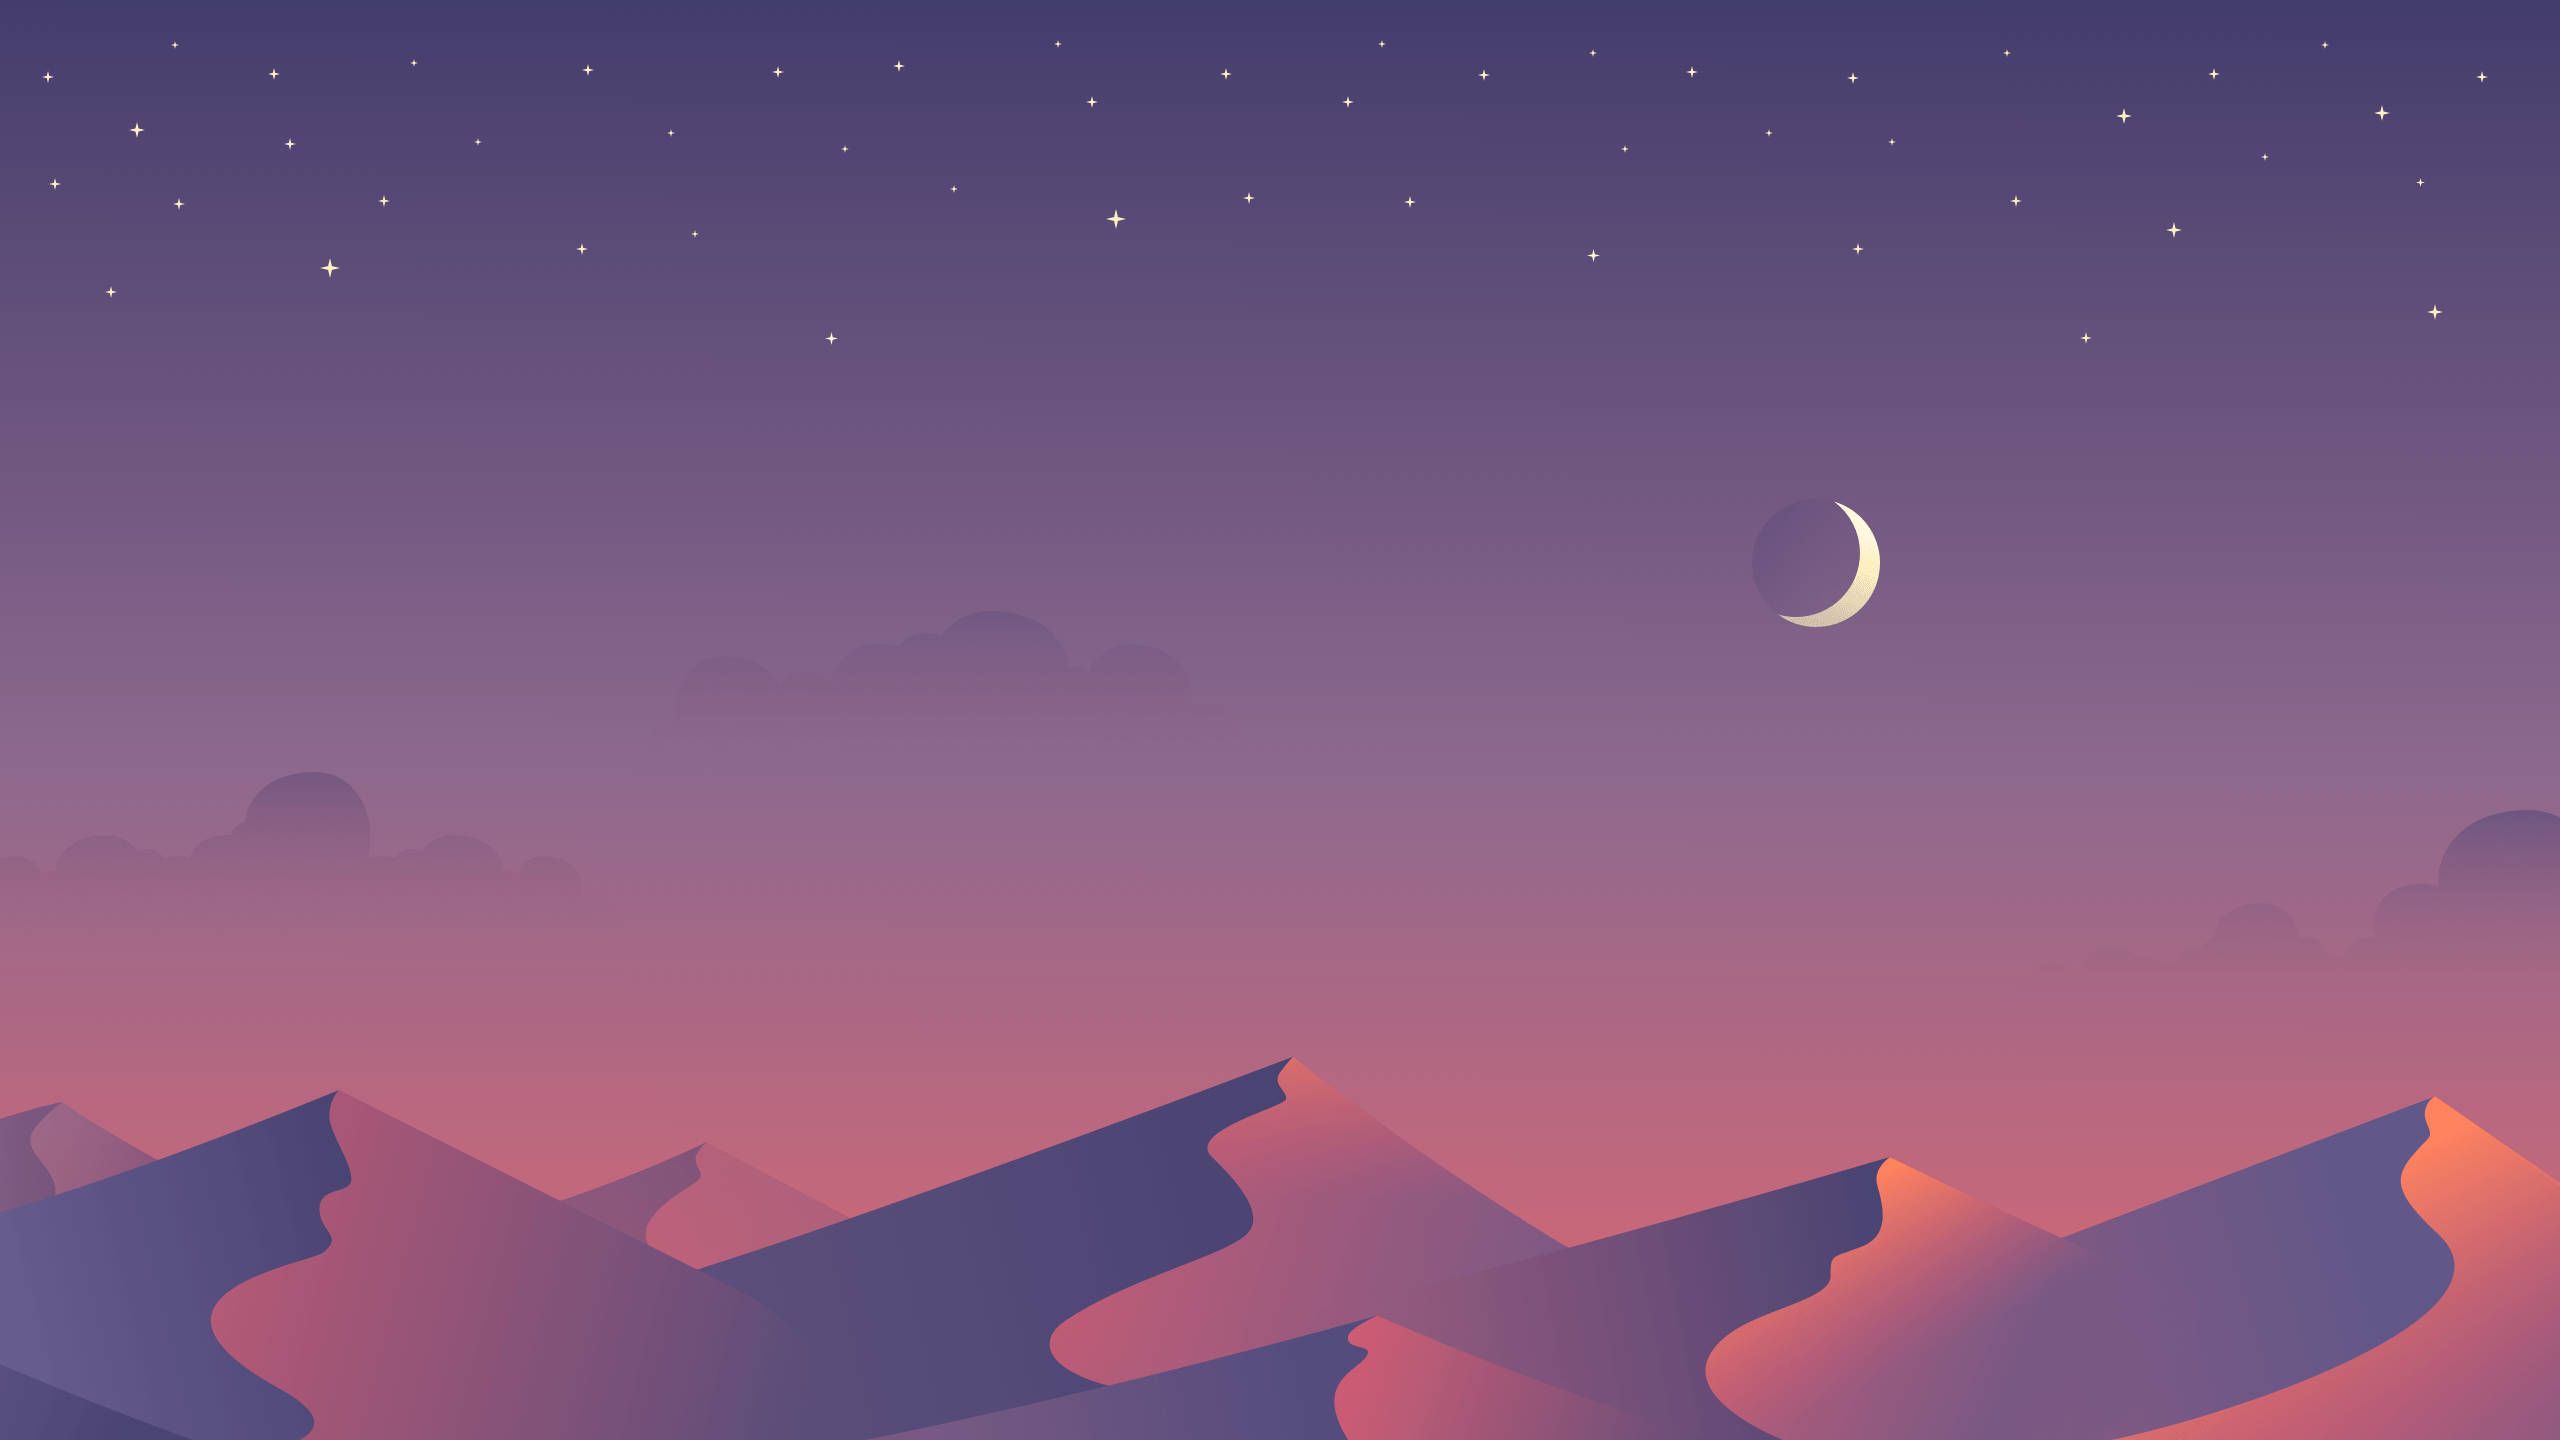 A minimalist desert landscape with a crescent moon and stars in the sky - YouTube